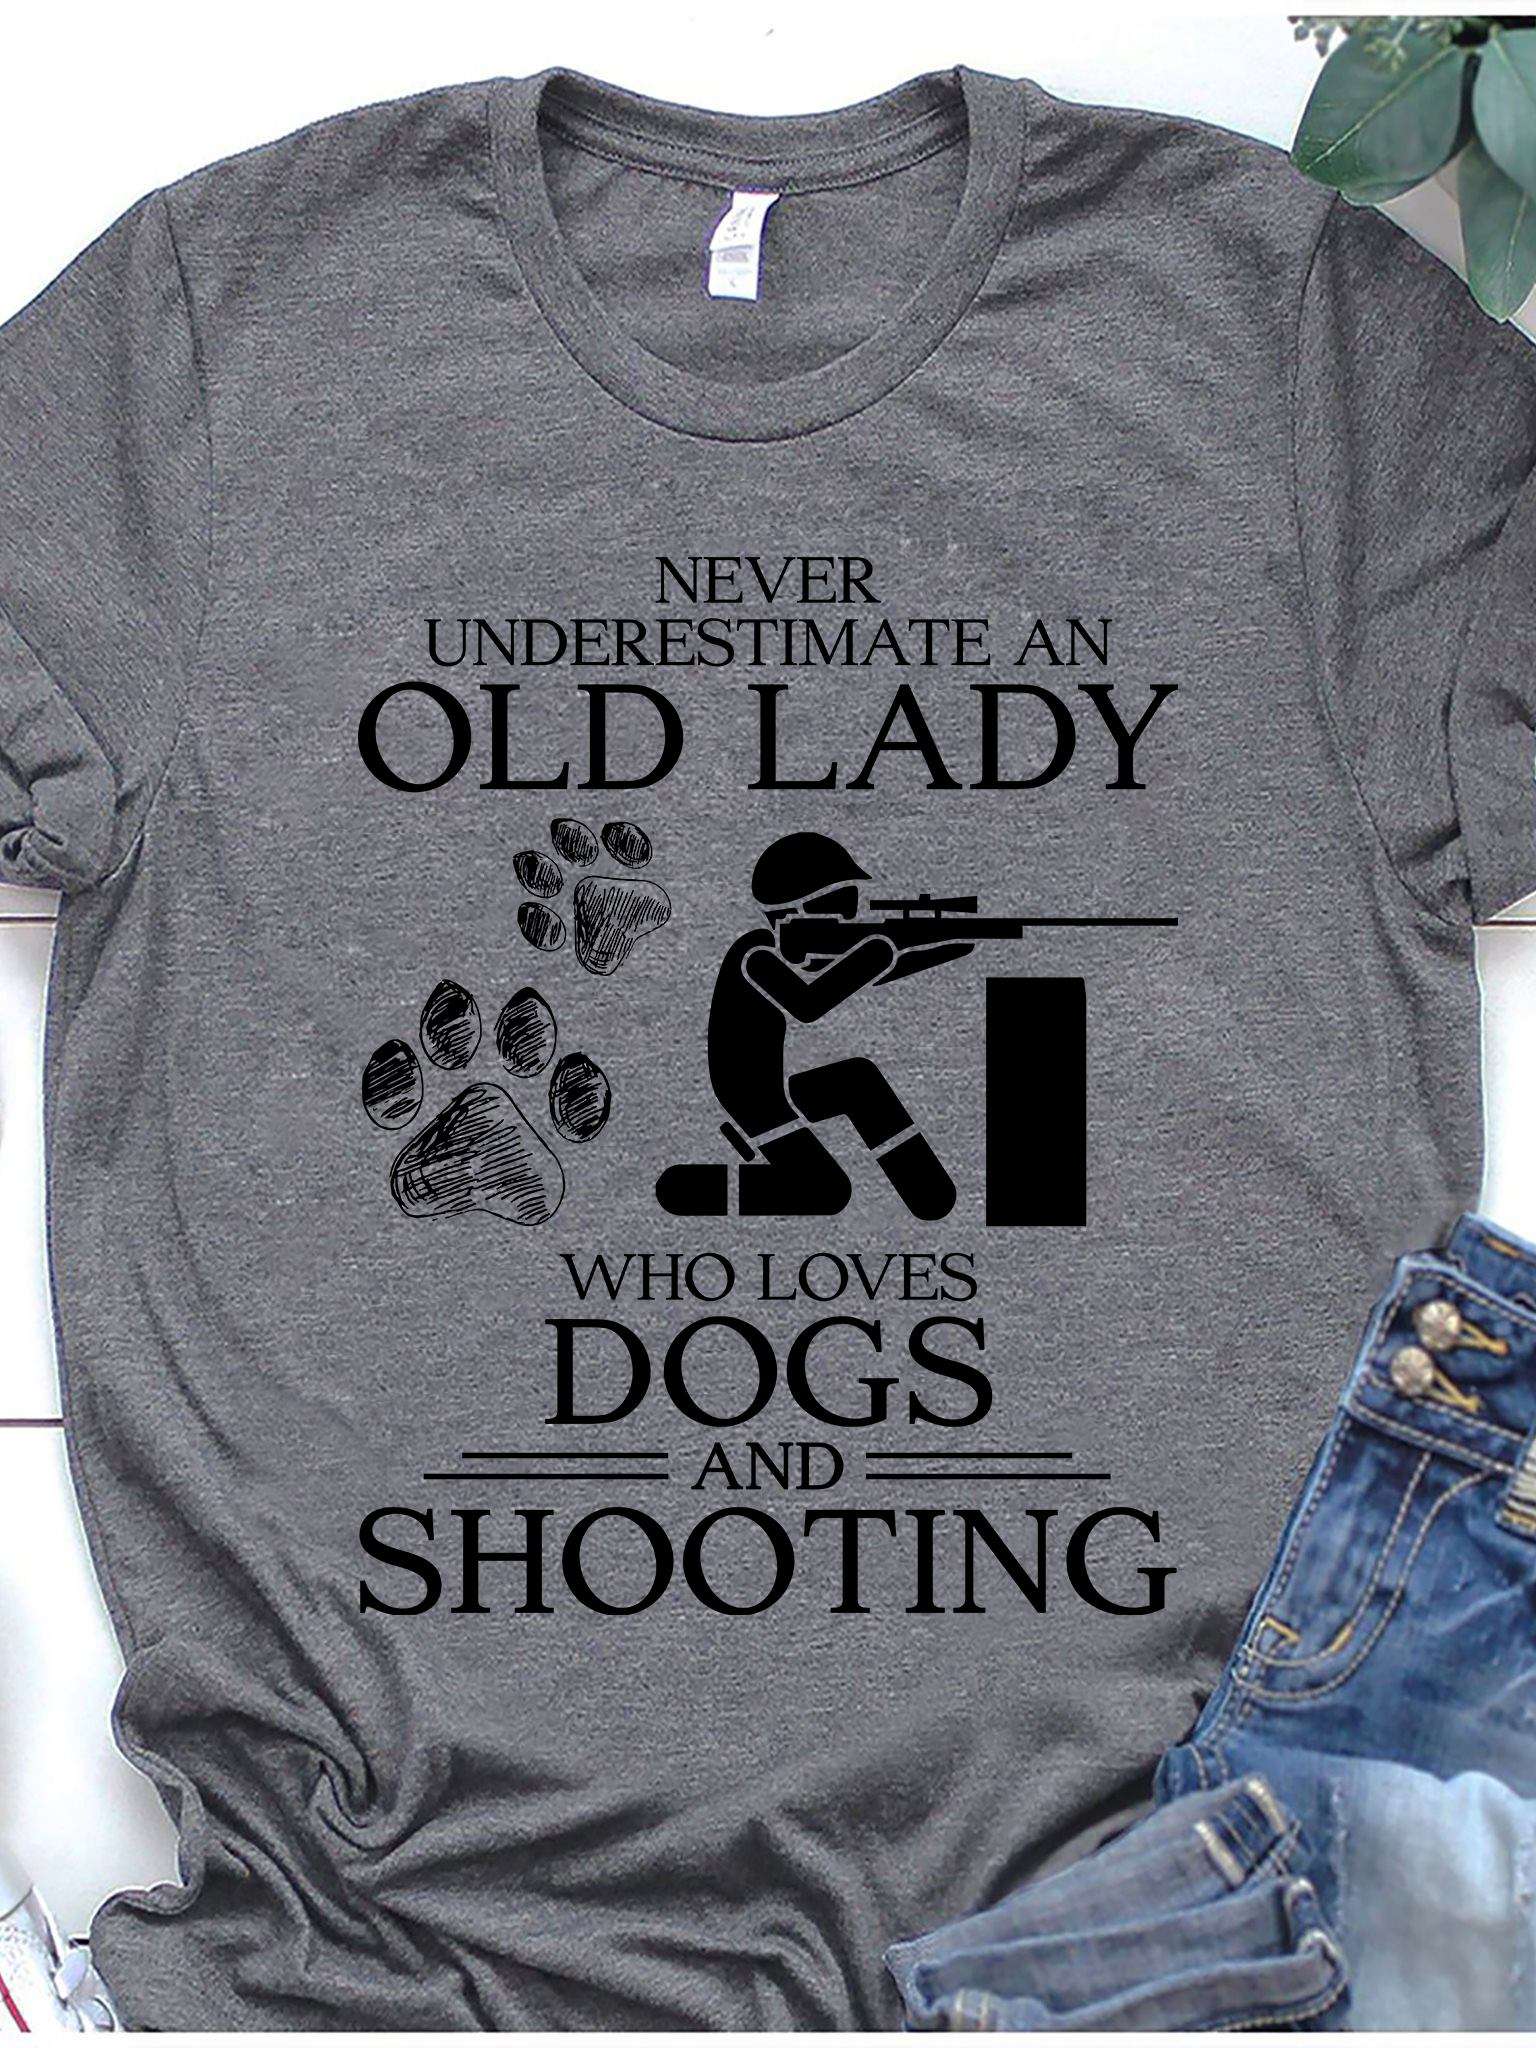 Dog Shooting - Never underestimate an old lady who loves dogs and shooting